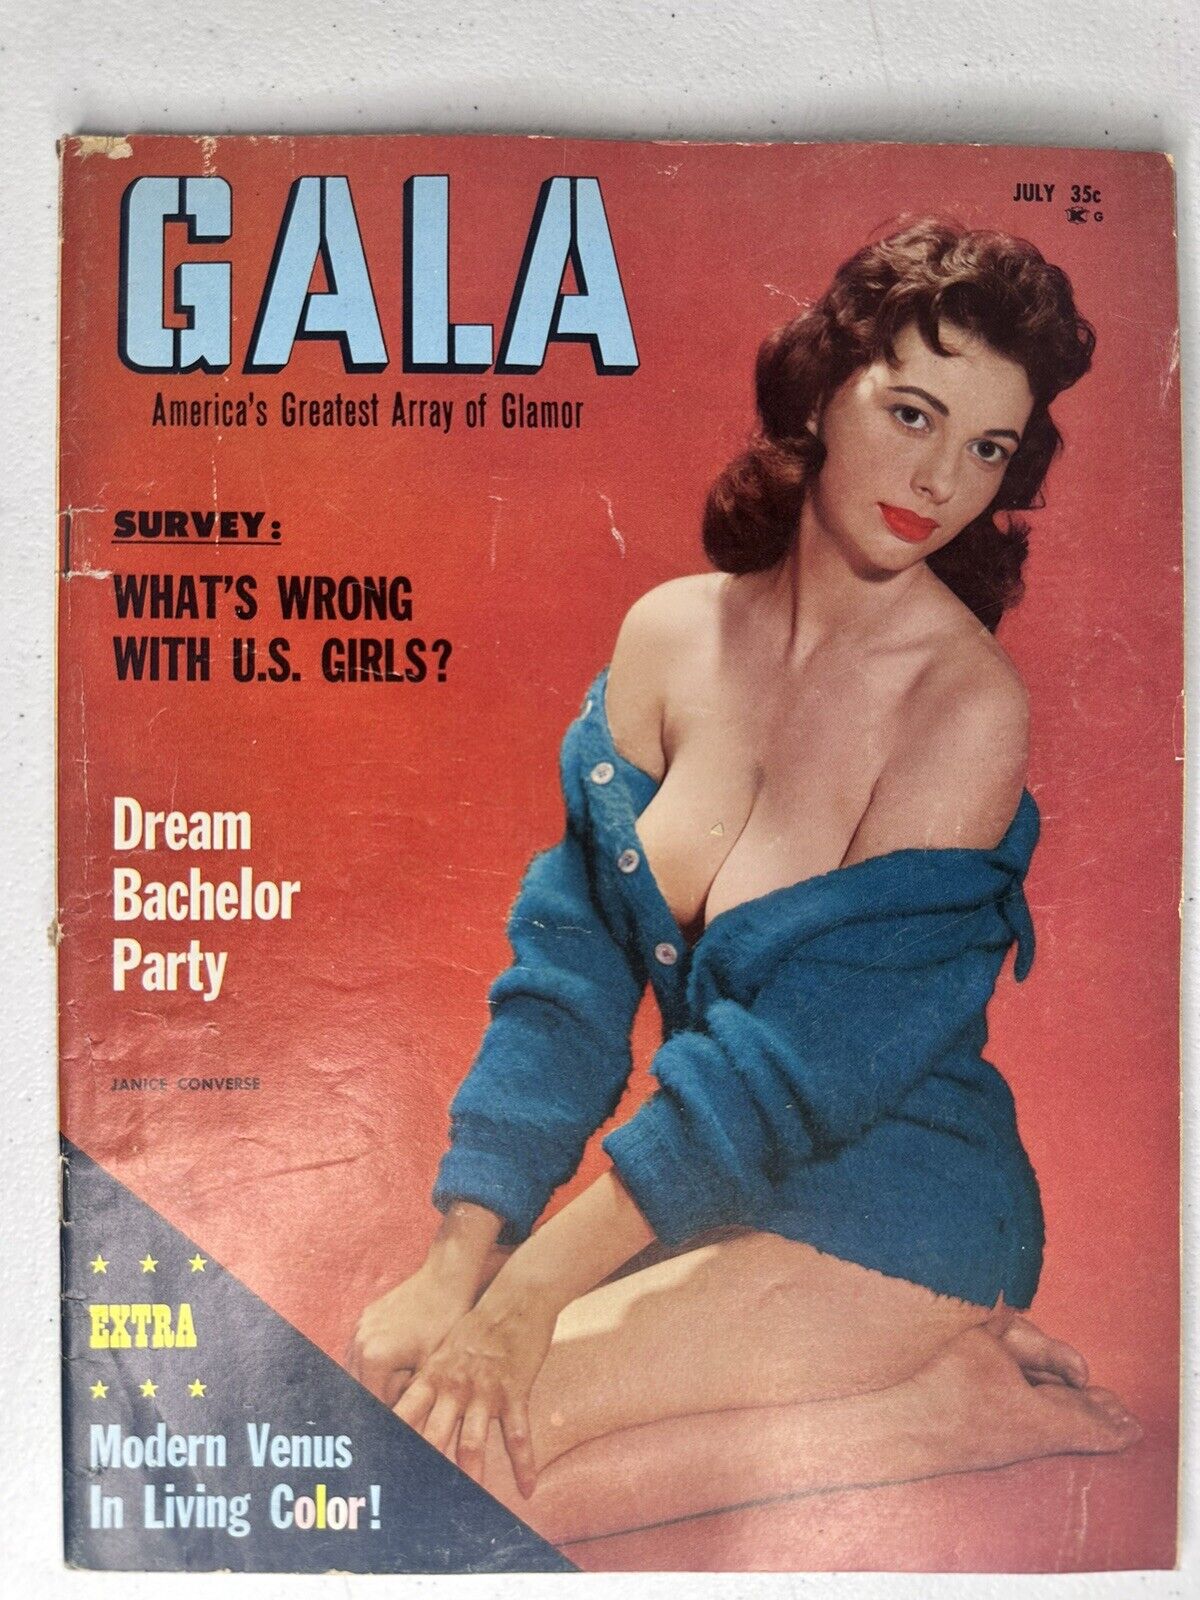 1961 GALA Men's Magazine - July Issue - Rare Vintage Glamour Collectible - TreasuTiques